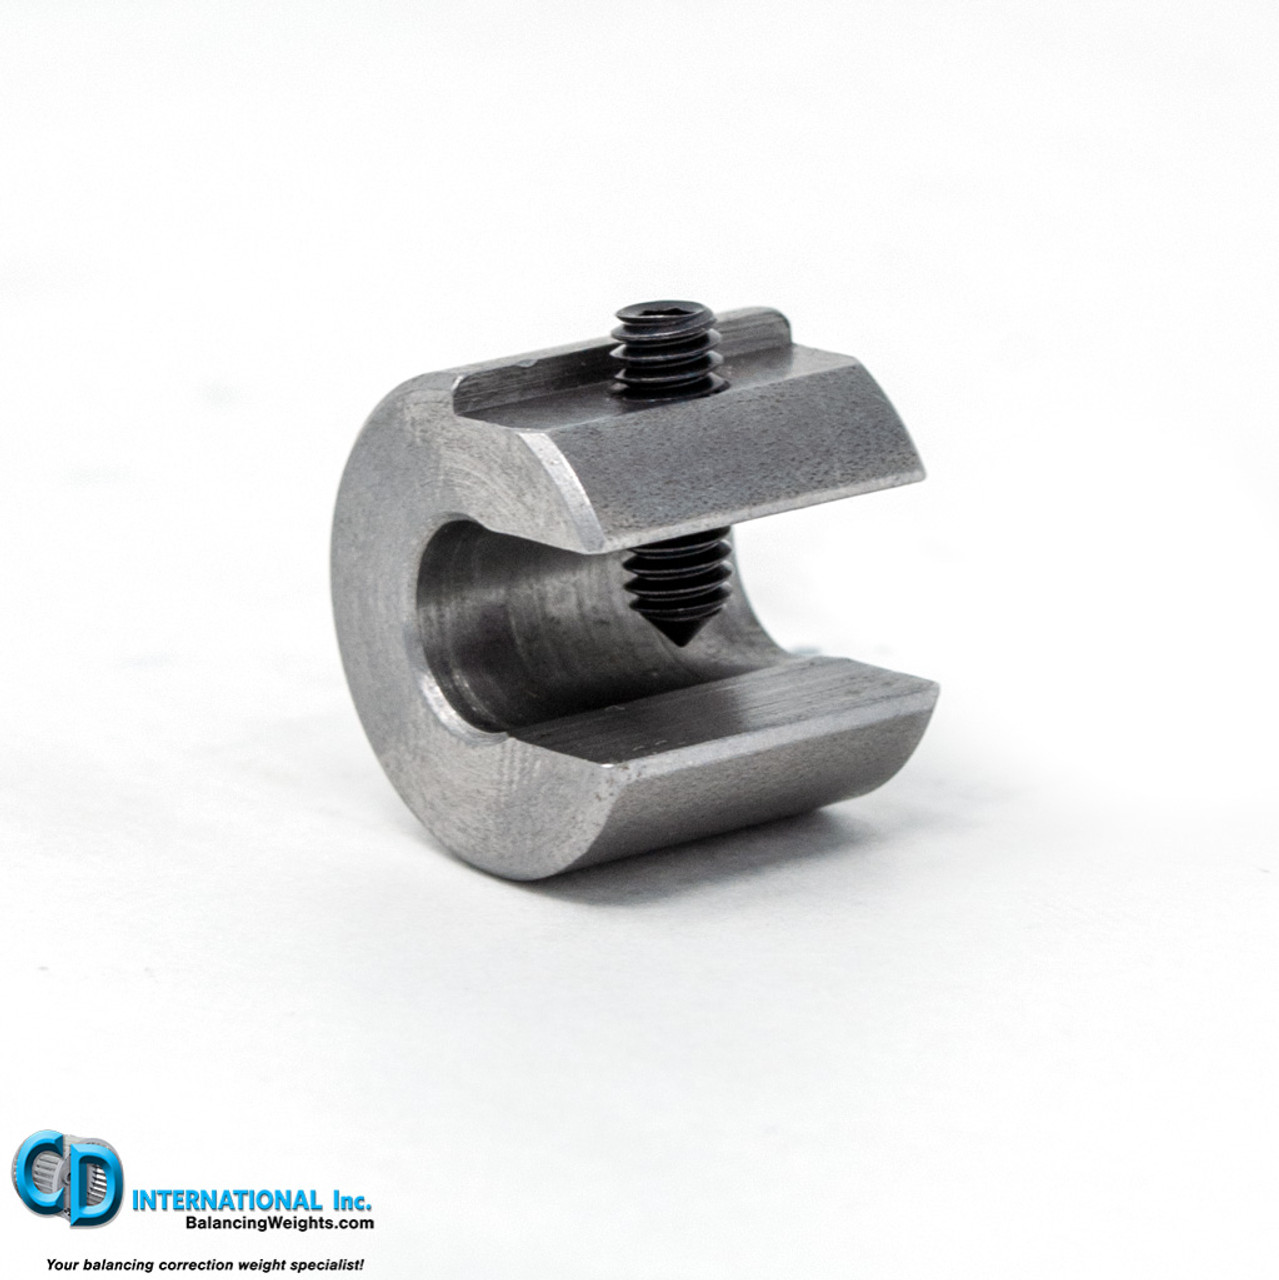 0.75 ounce (21 g) Steel Balancing C-Clamp weights, 5/16" throat - SC-75